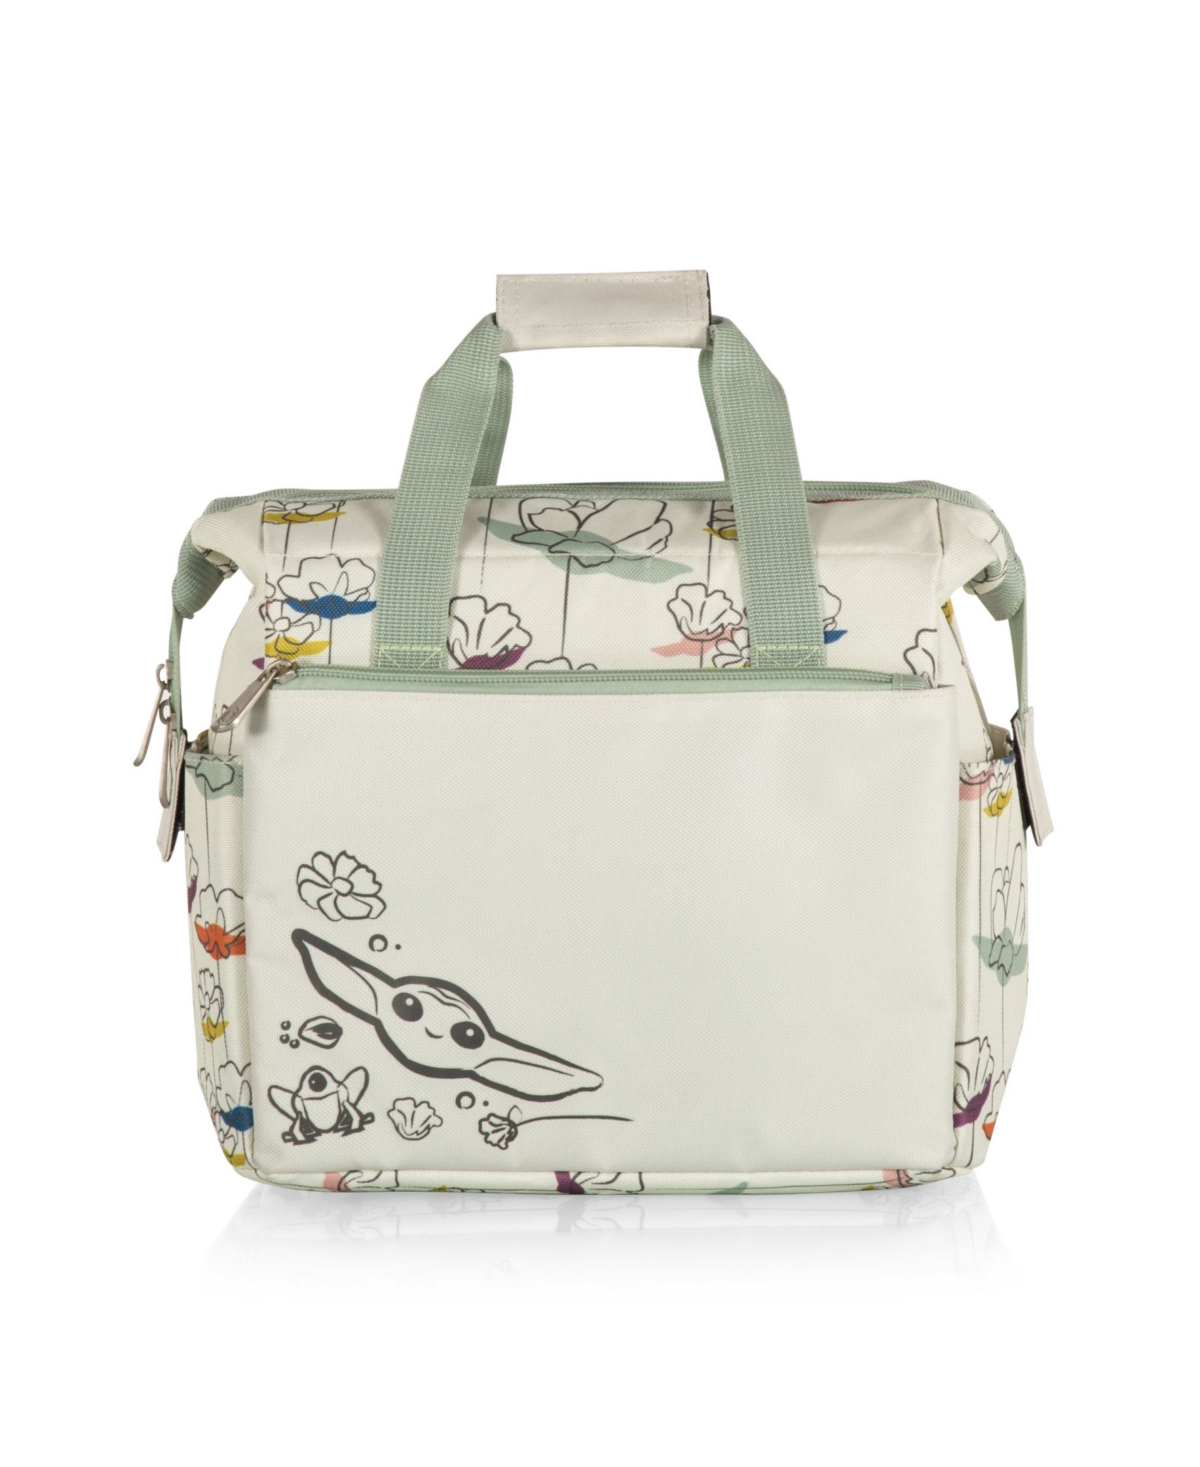 Star Wars on the Go Lunch Cooler - Cream with Floral Pattern